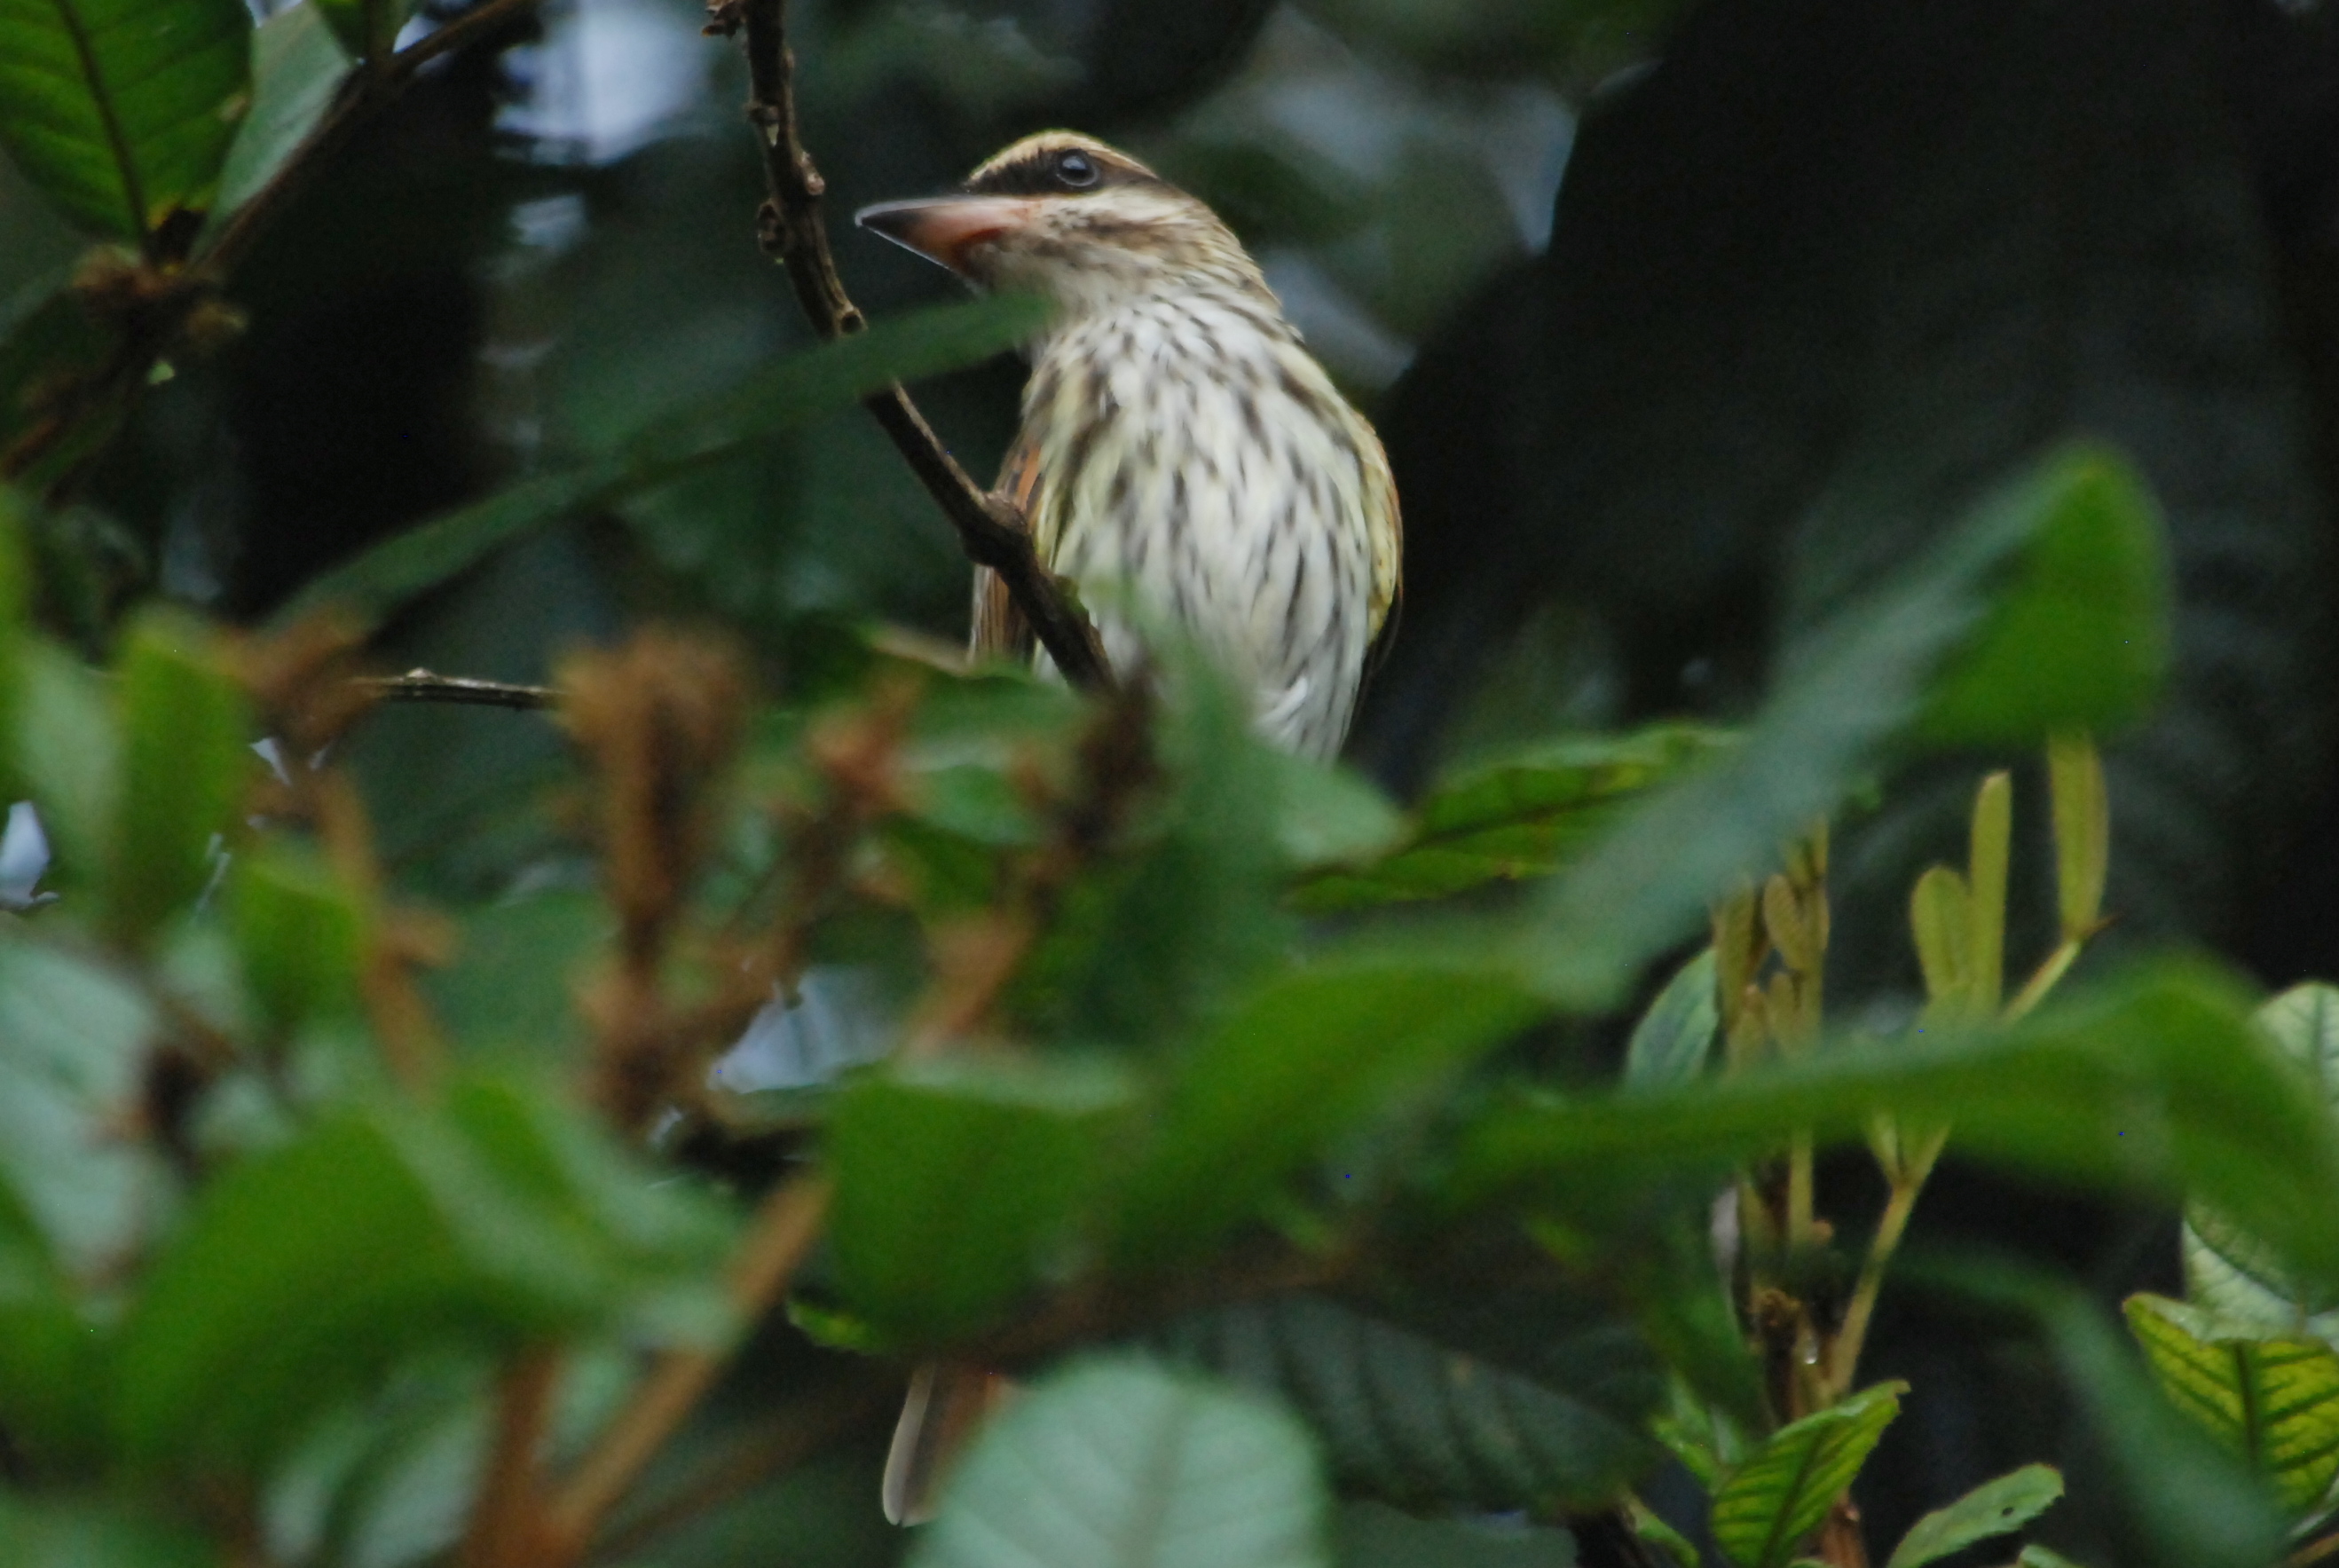 Click picture to see more Streaked Flycatchers.